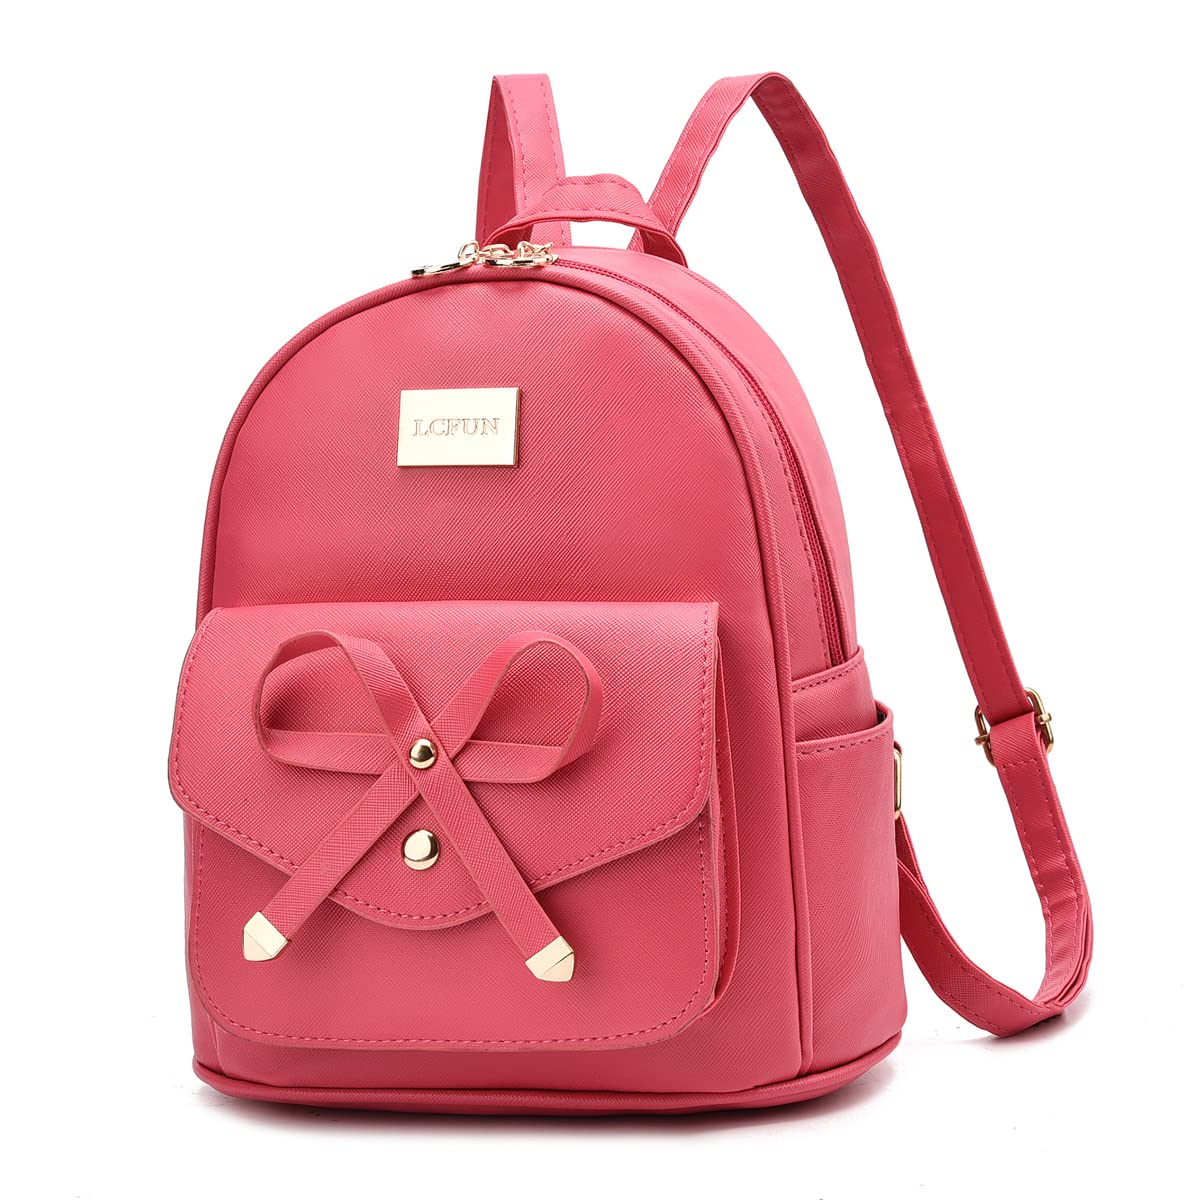 LCFUN Cute Mini Leather Backpack Fashion Small Daypacks Purse for Girls and Women